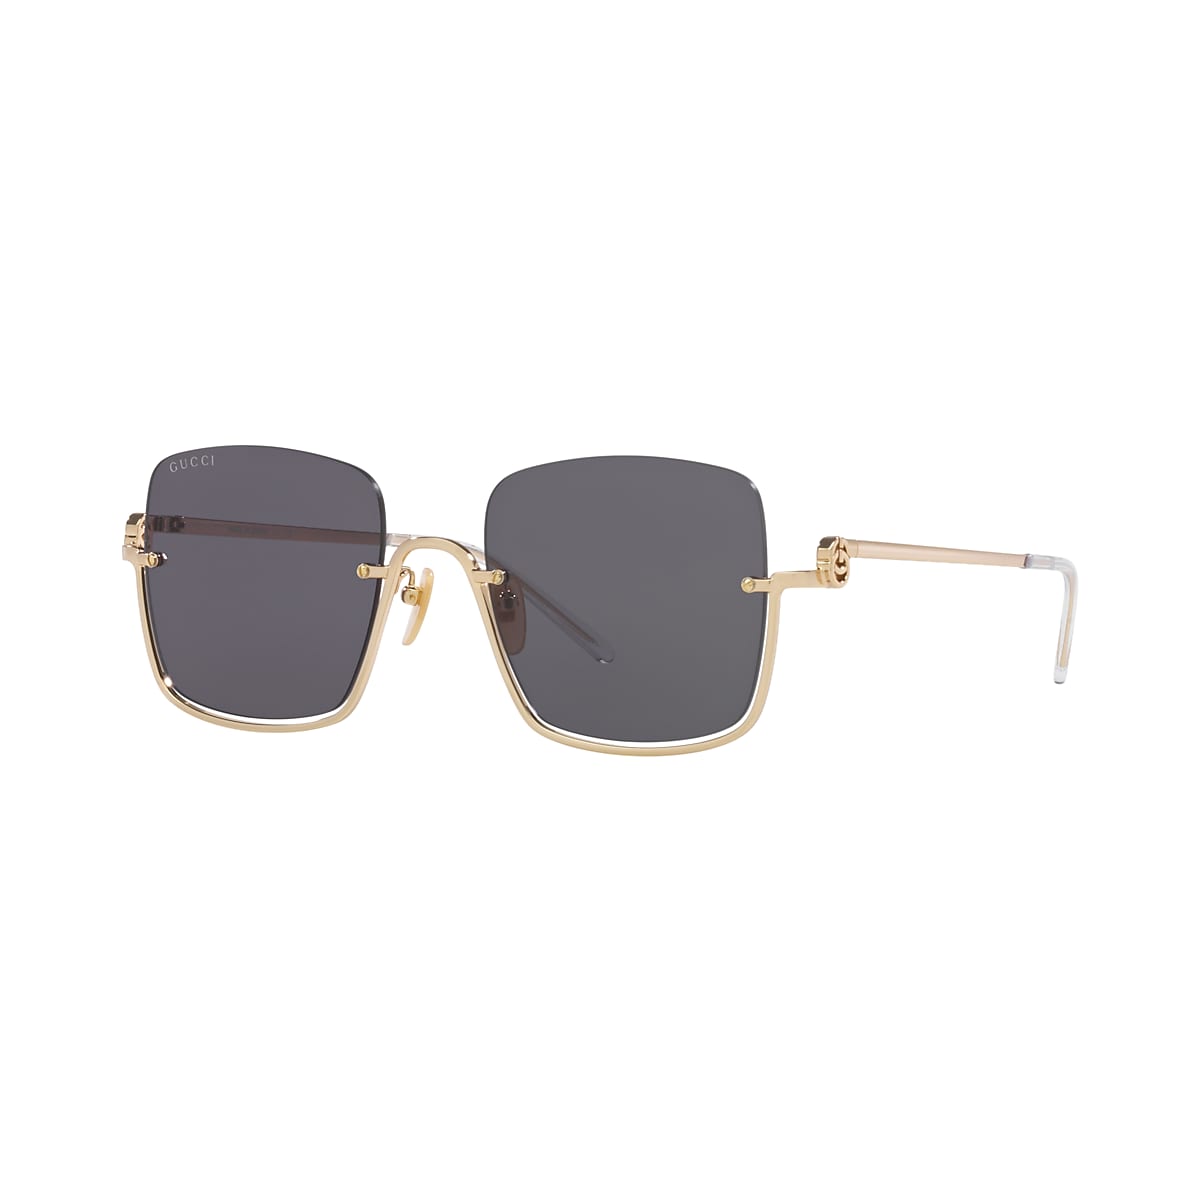 Gucci GG1279S 006 Gold-Gold-Gold